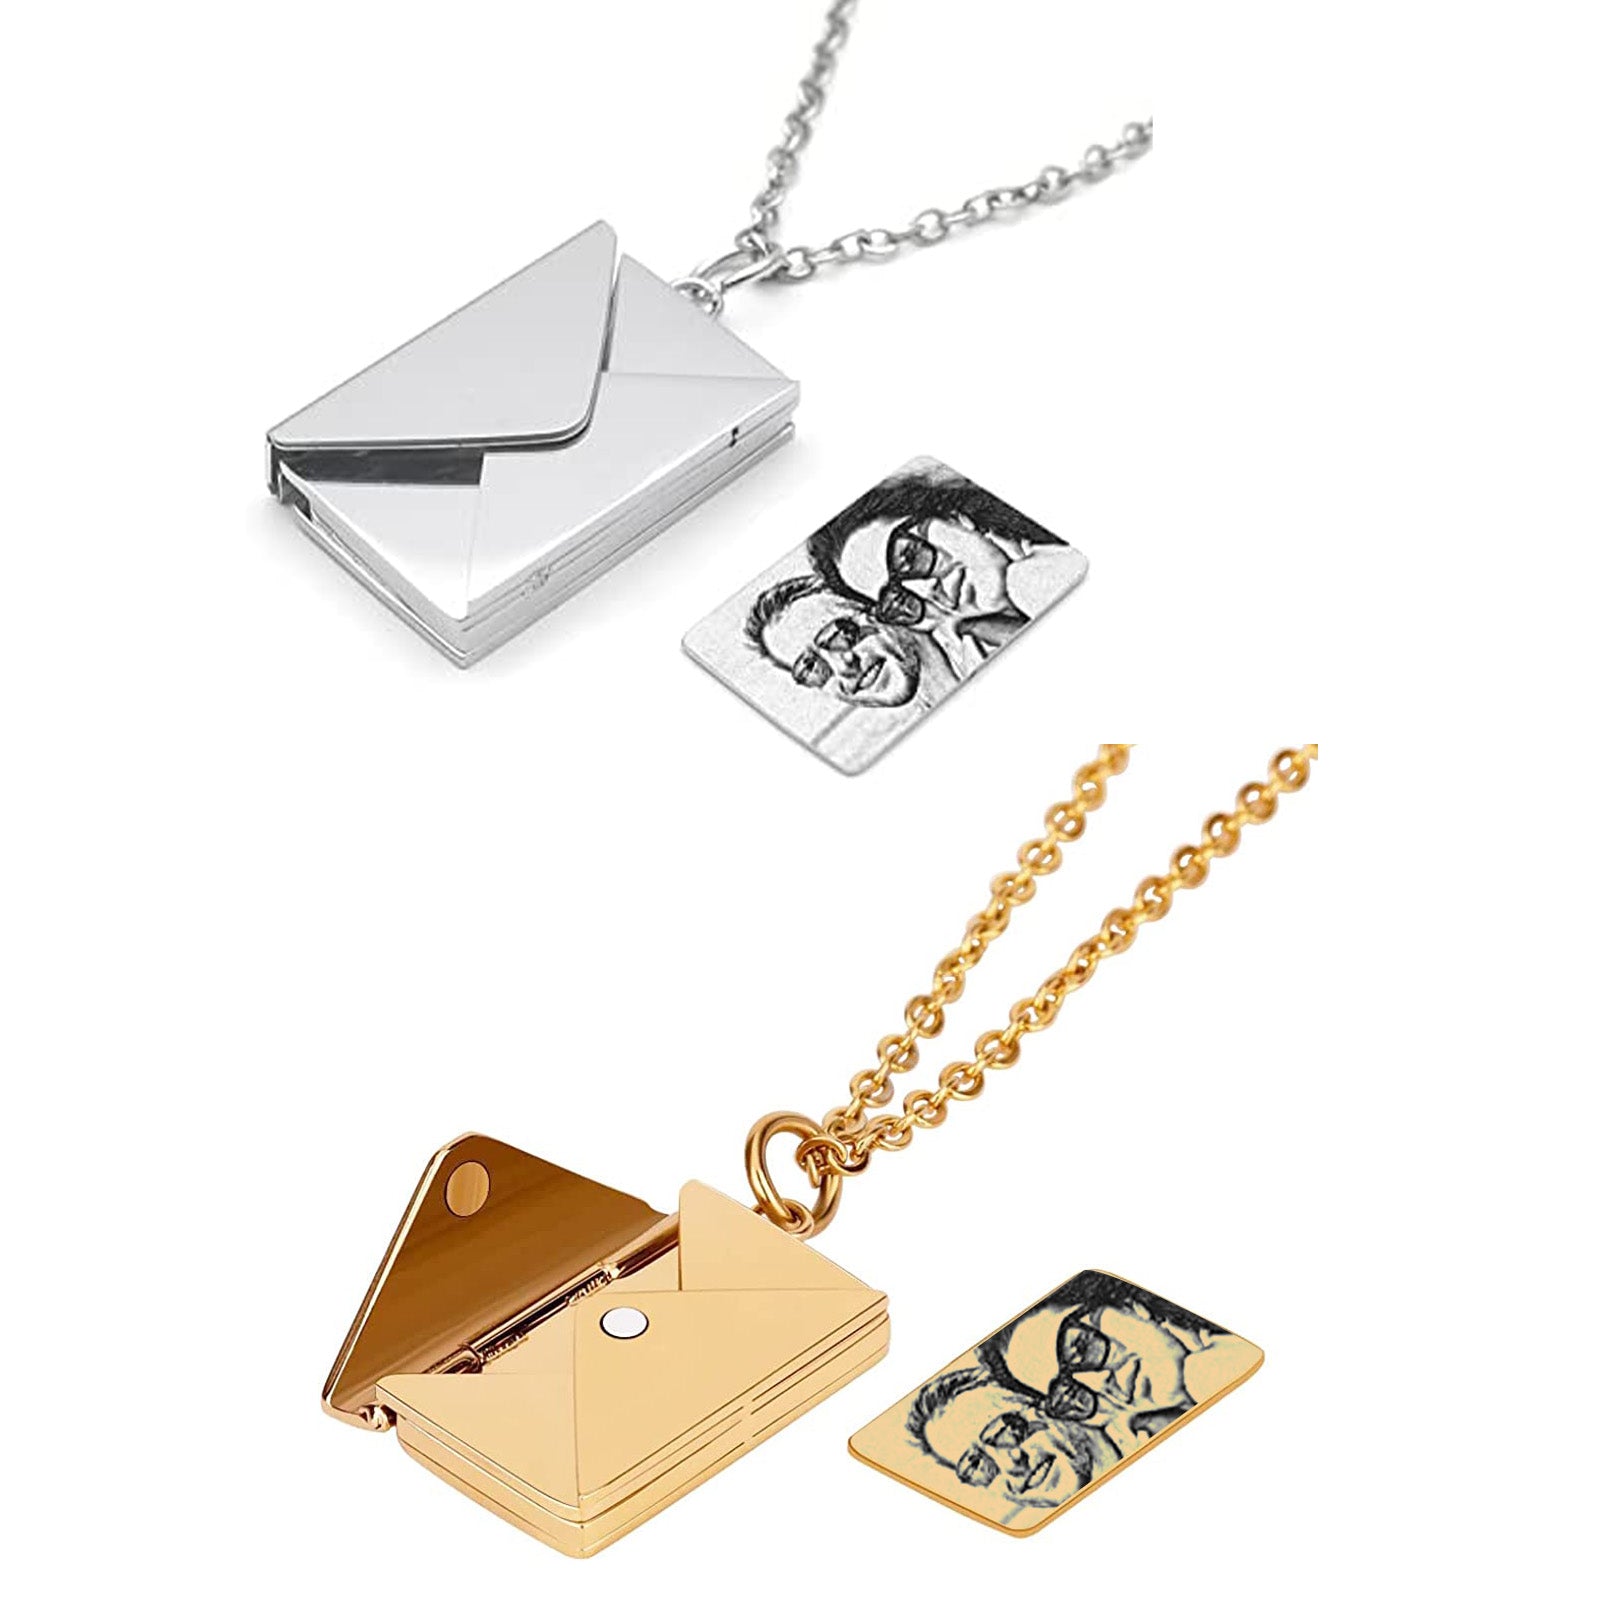 Stainless steel Personalized Love Letter Necklaces